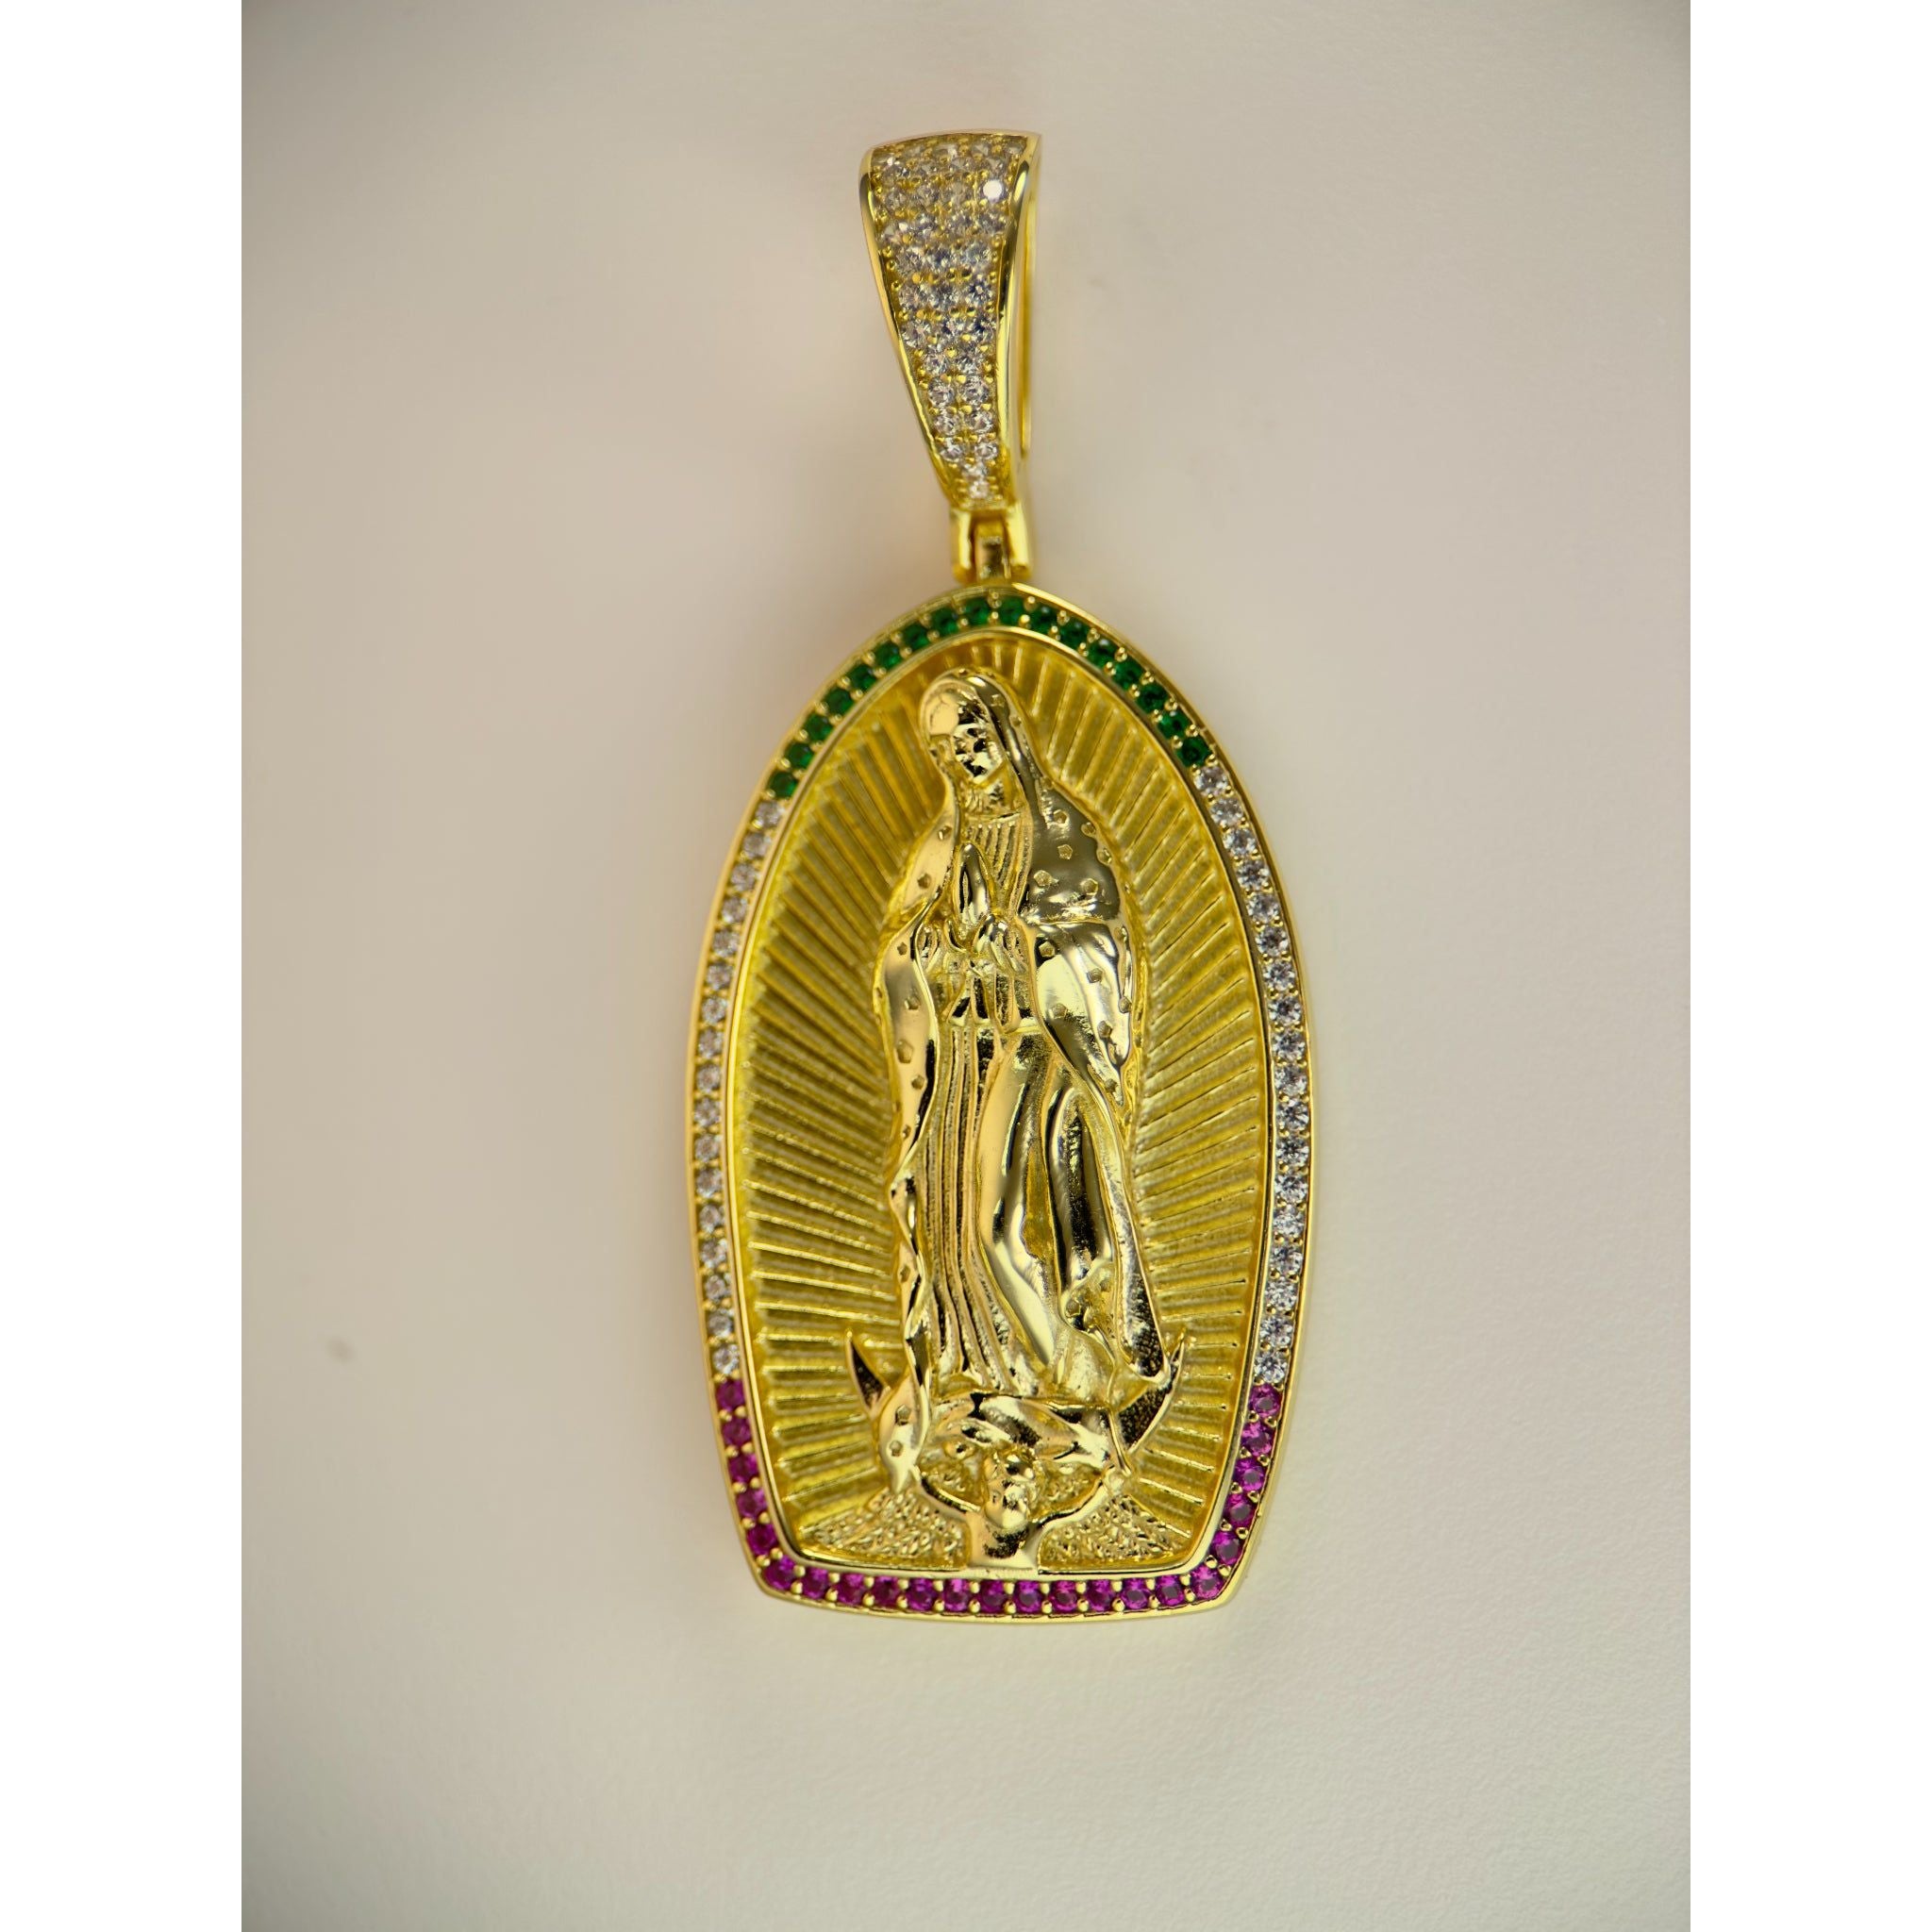 DR3174 - 925 Sterling Silver,14k Gold Bonded - Lab Created Stones - Pendant - Blessed Mother Pendant